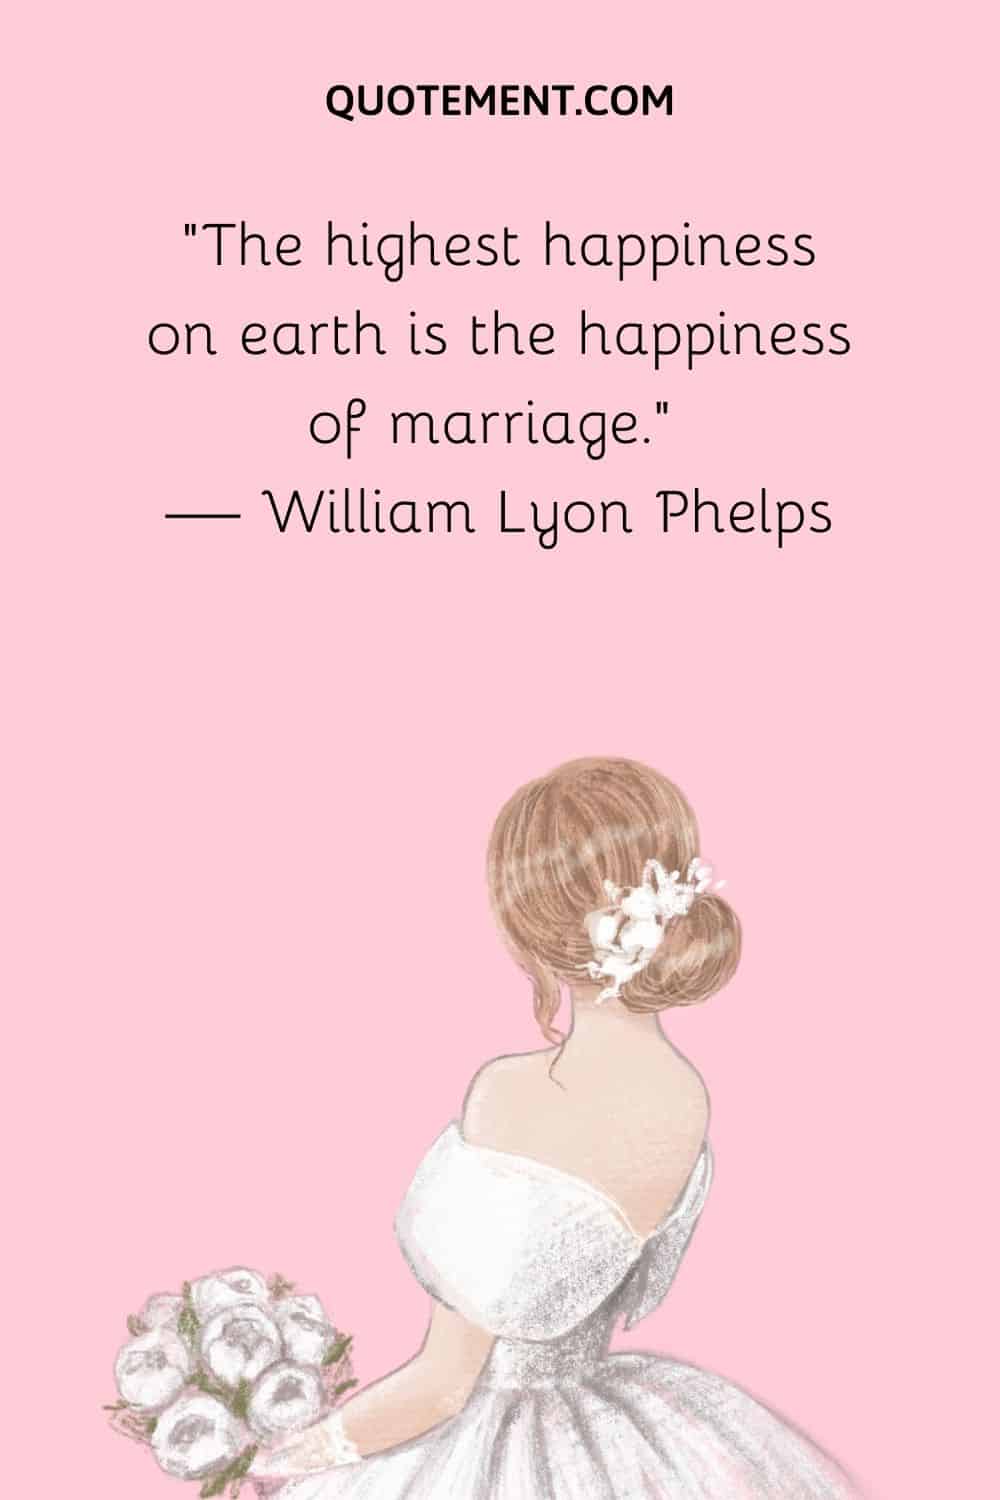 The highest happiness on earth is the happiness of marriage. — William Lyon Phelps